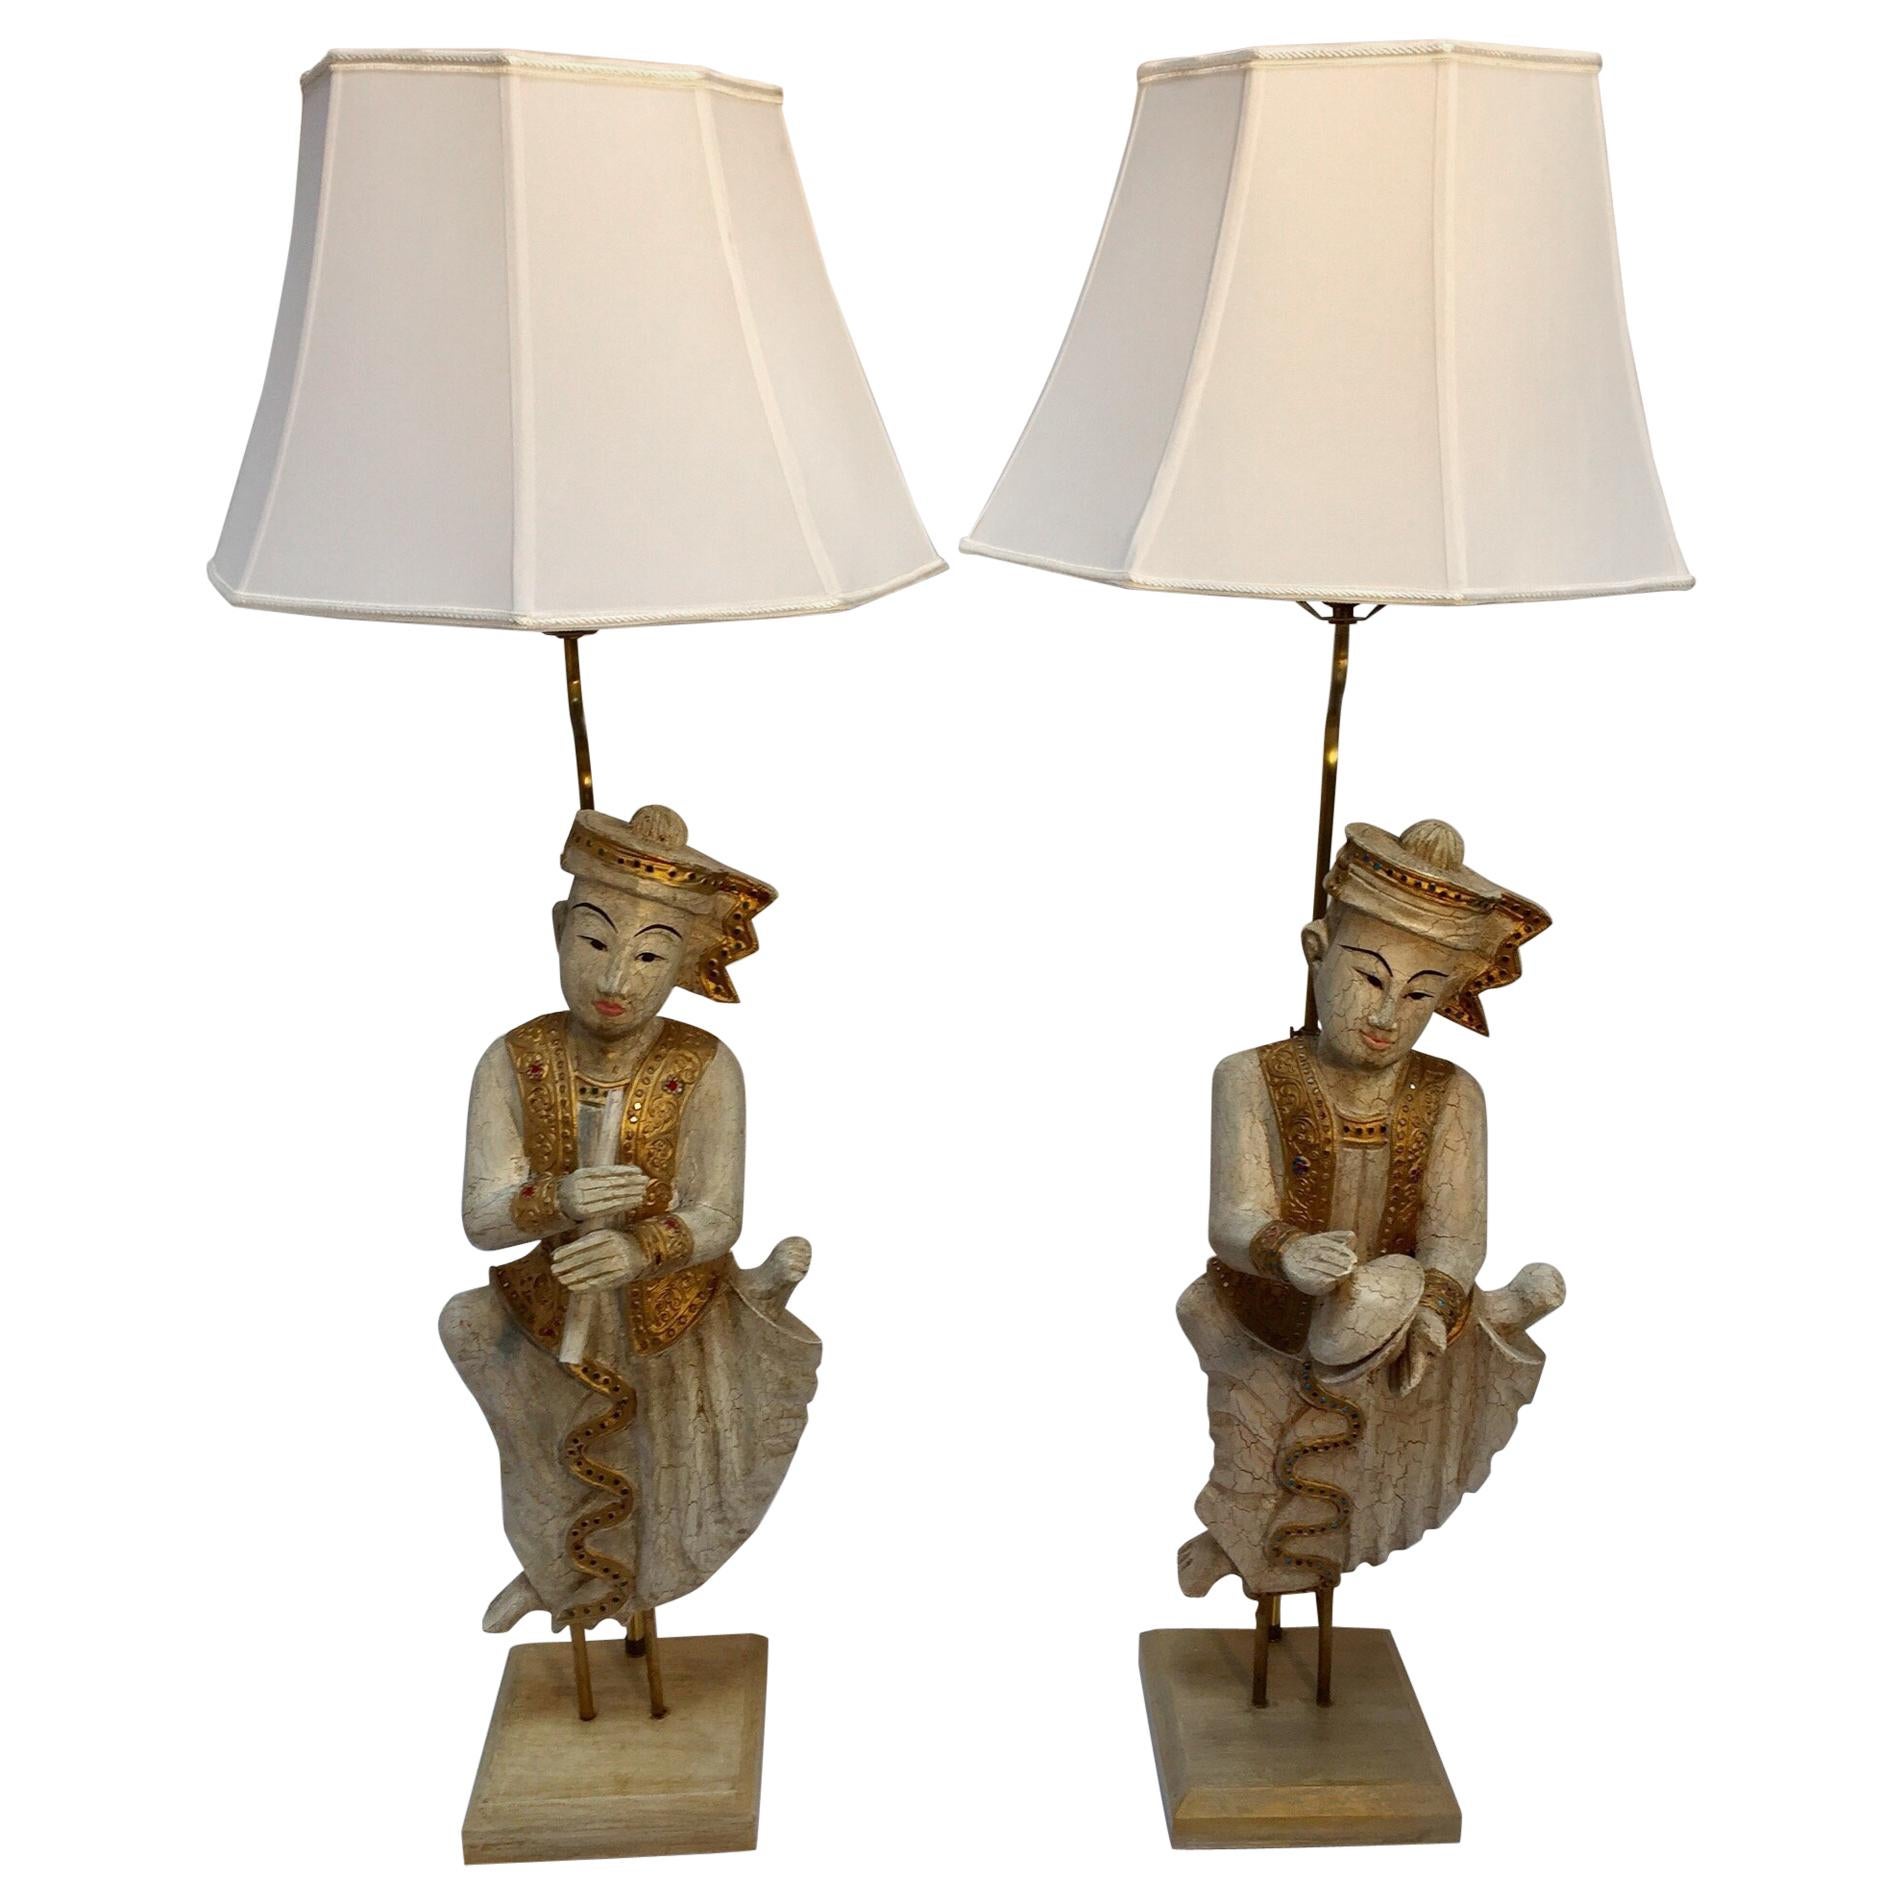 Pair of Asian Figures of Burmese Musicians Turned into Table Lamps For Sale